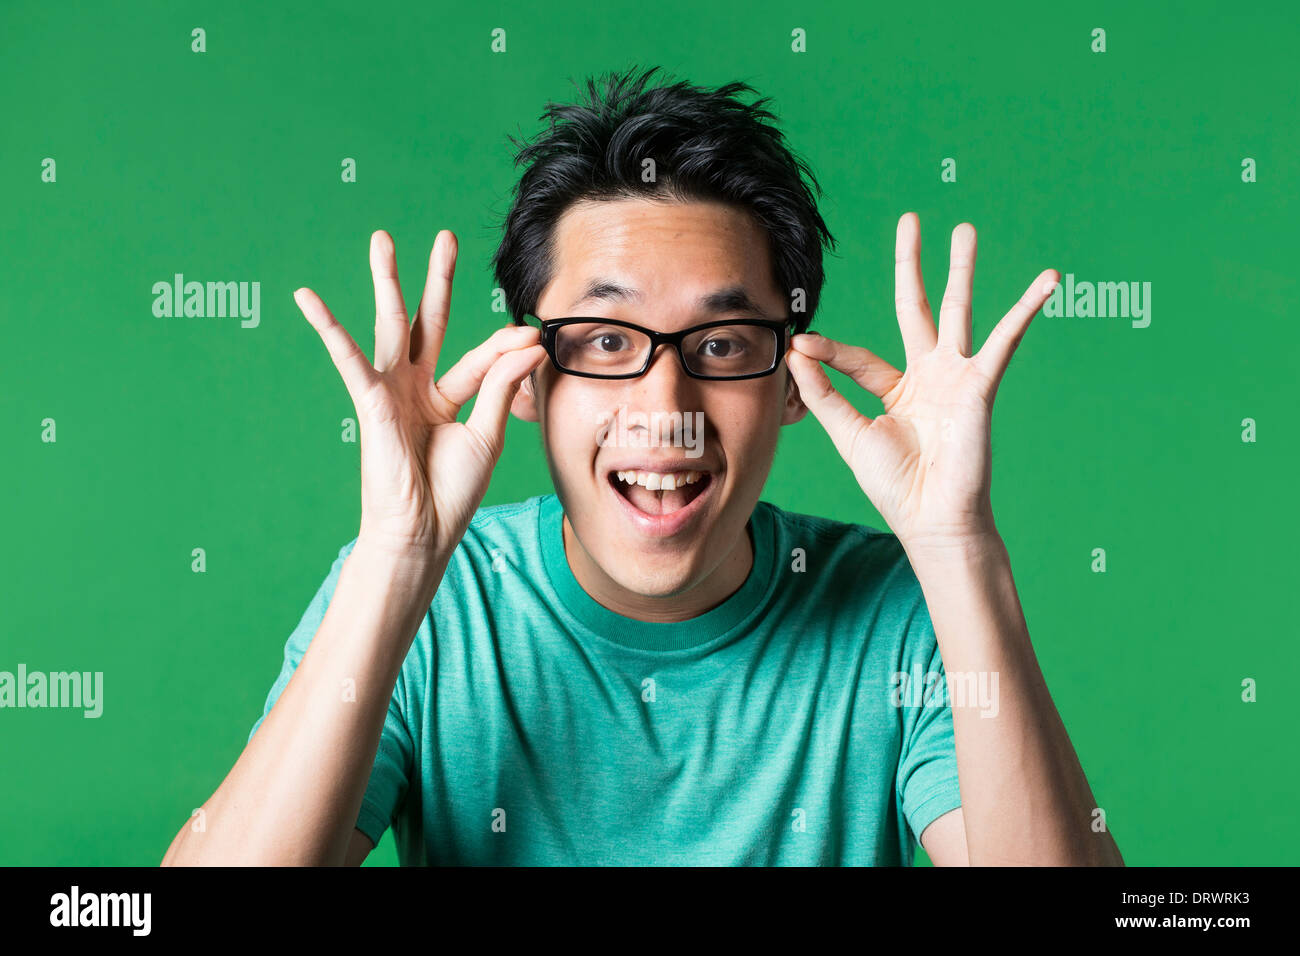 Surprised and amazed looking Asian man standing against green background. Stock Photo